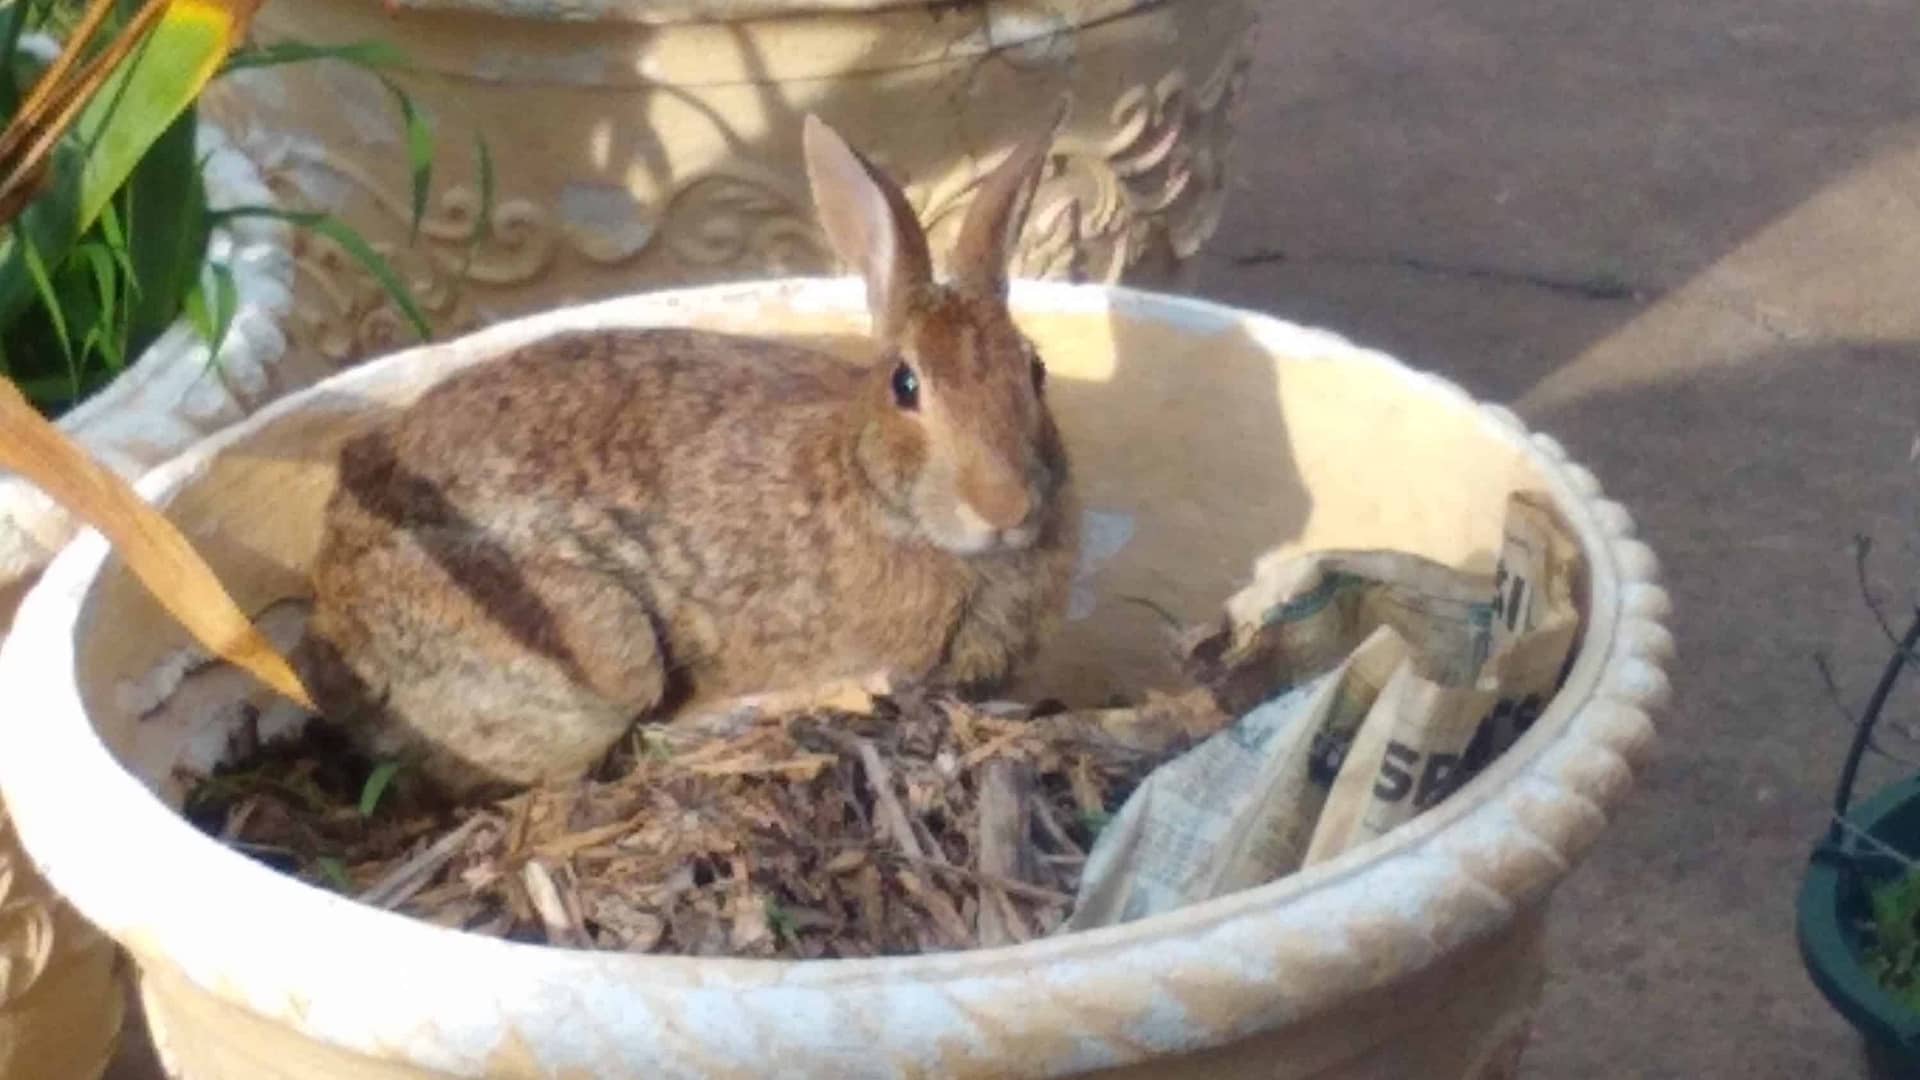 Brown rabbit in a planter looking directly at the camera